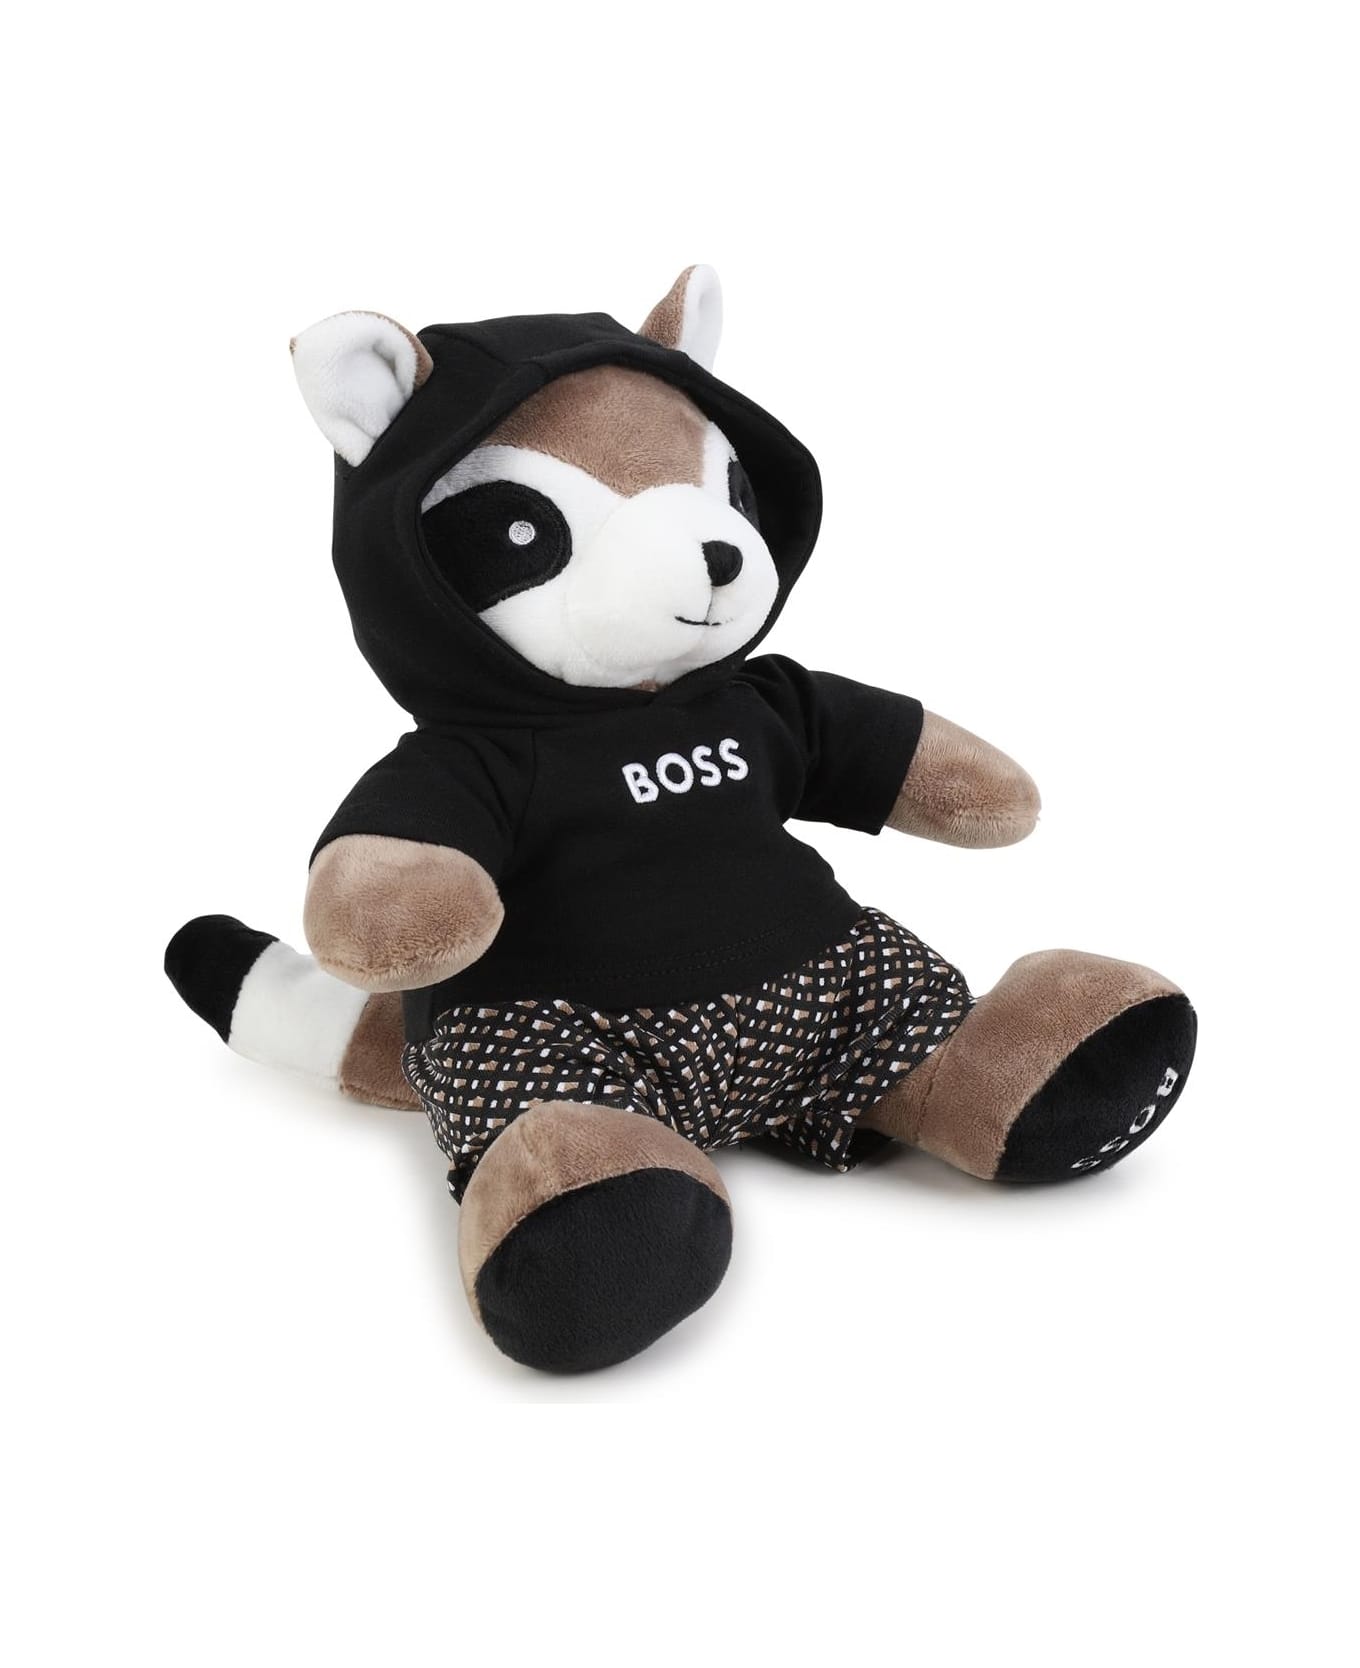 Hugo Boss Red Panda Plush With Embroidery - Beige アクセサリー＆ギフト